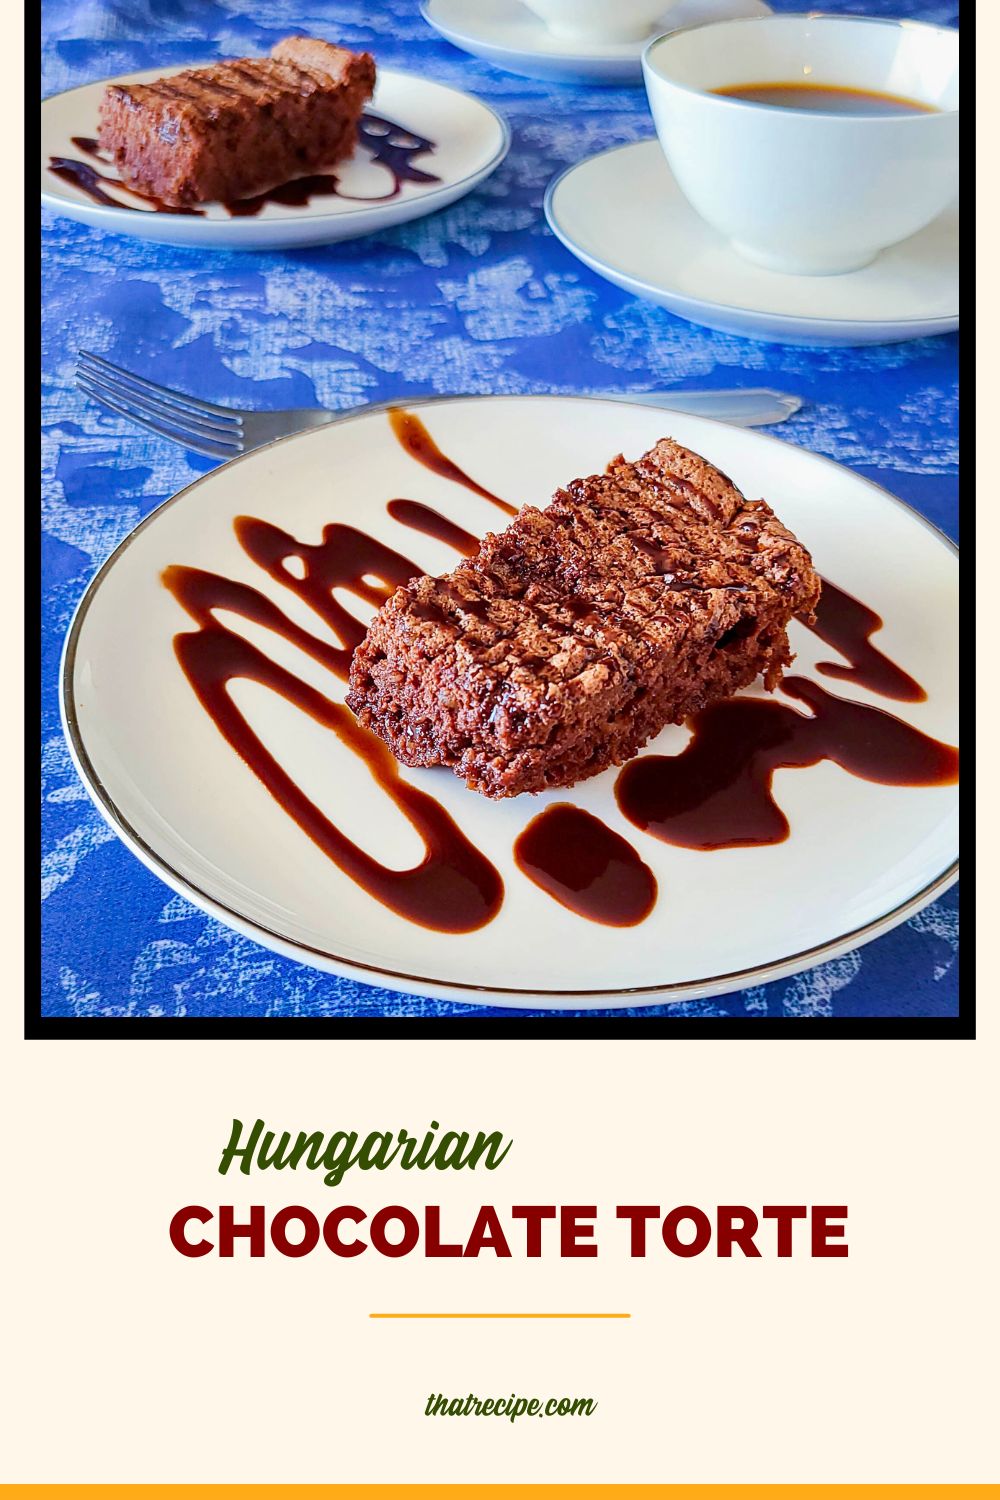 slice of chocolate torte on a plate drizzled in chocolate sauce with text overlay "Hungarian chocolate torte"